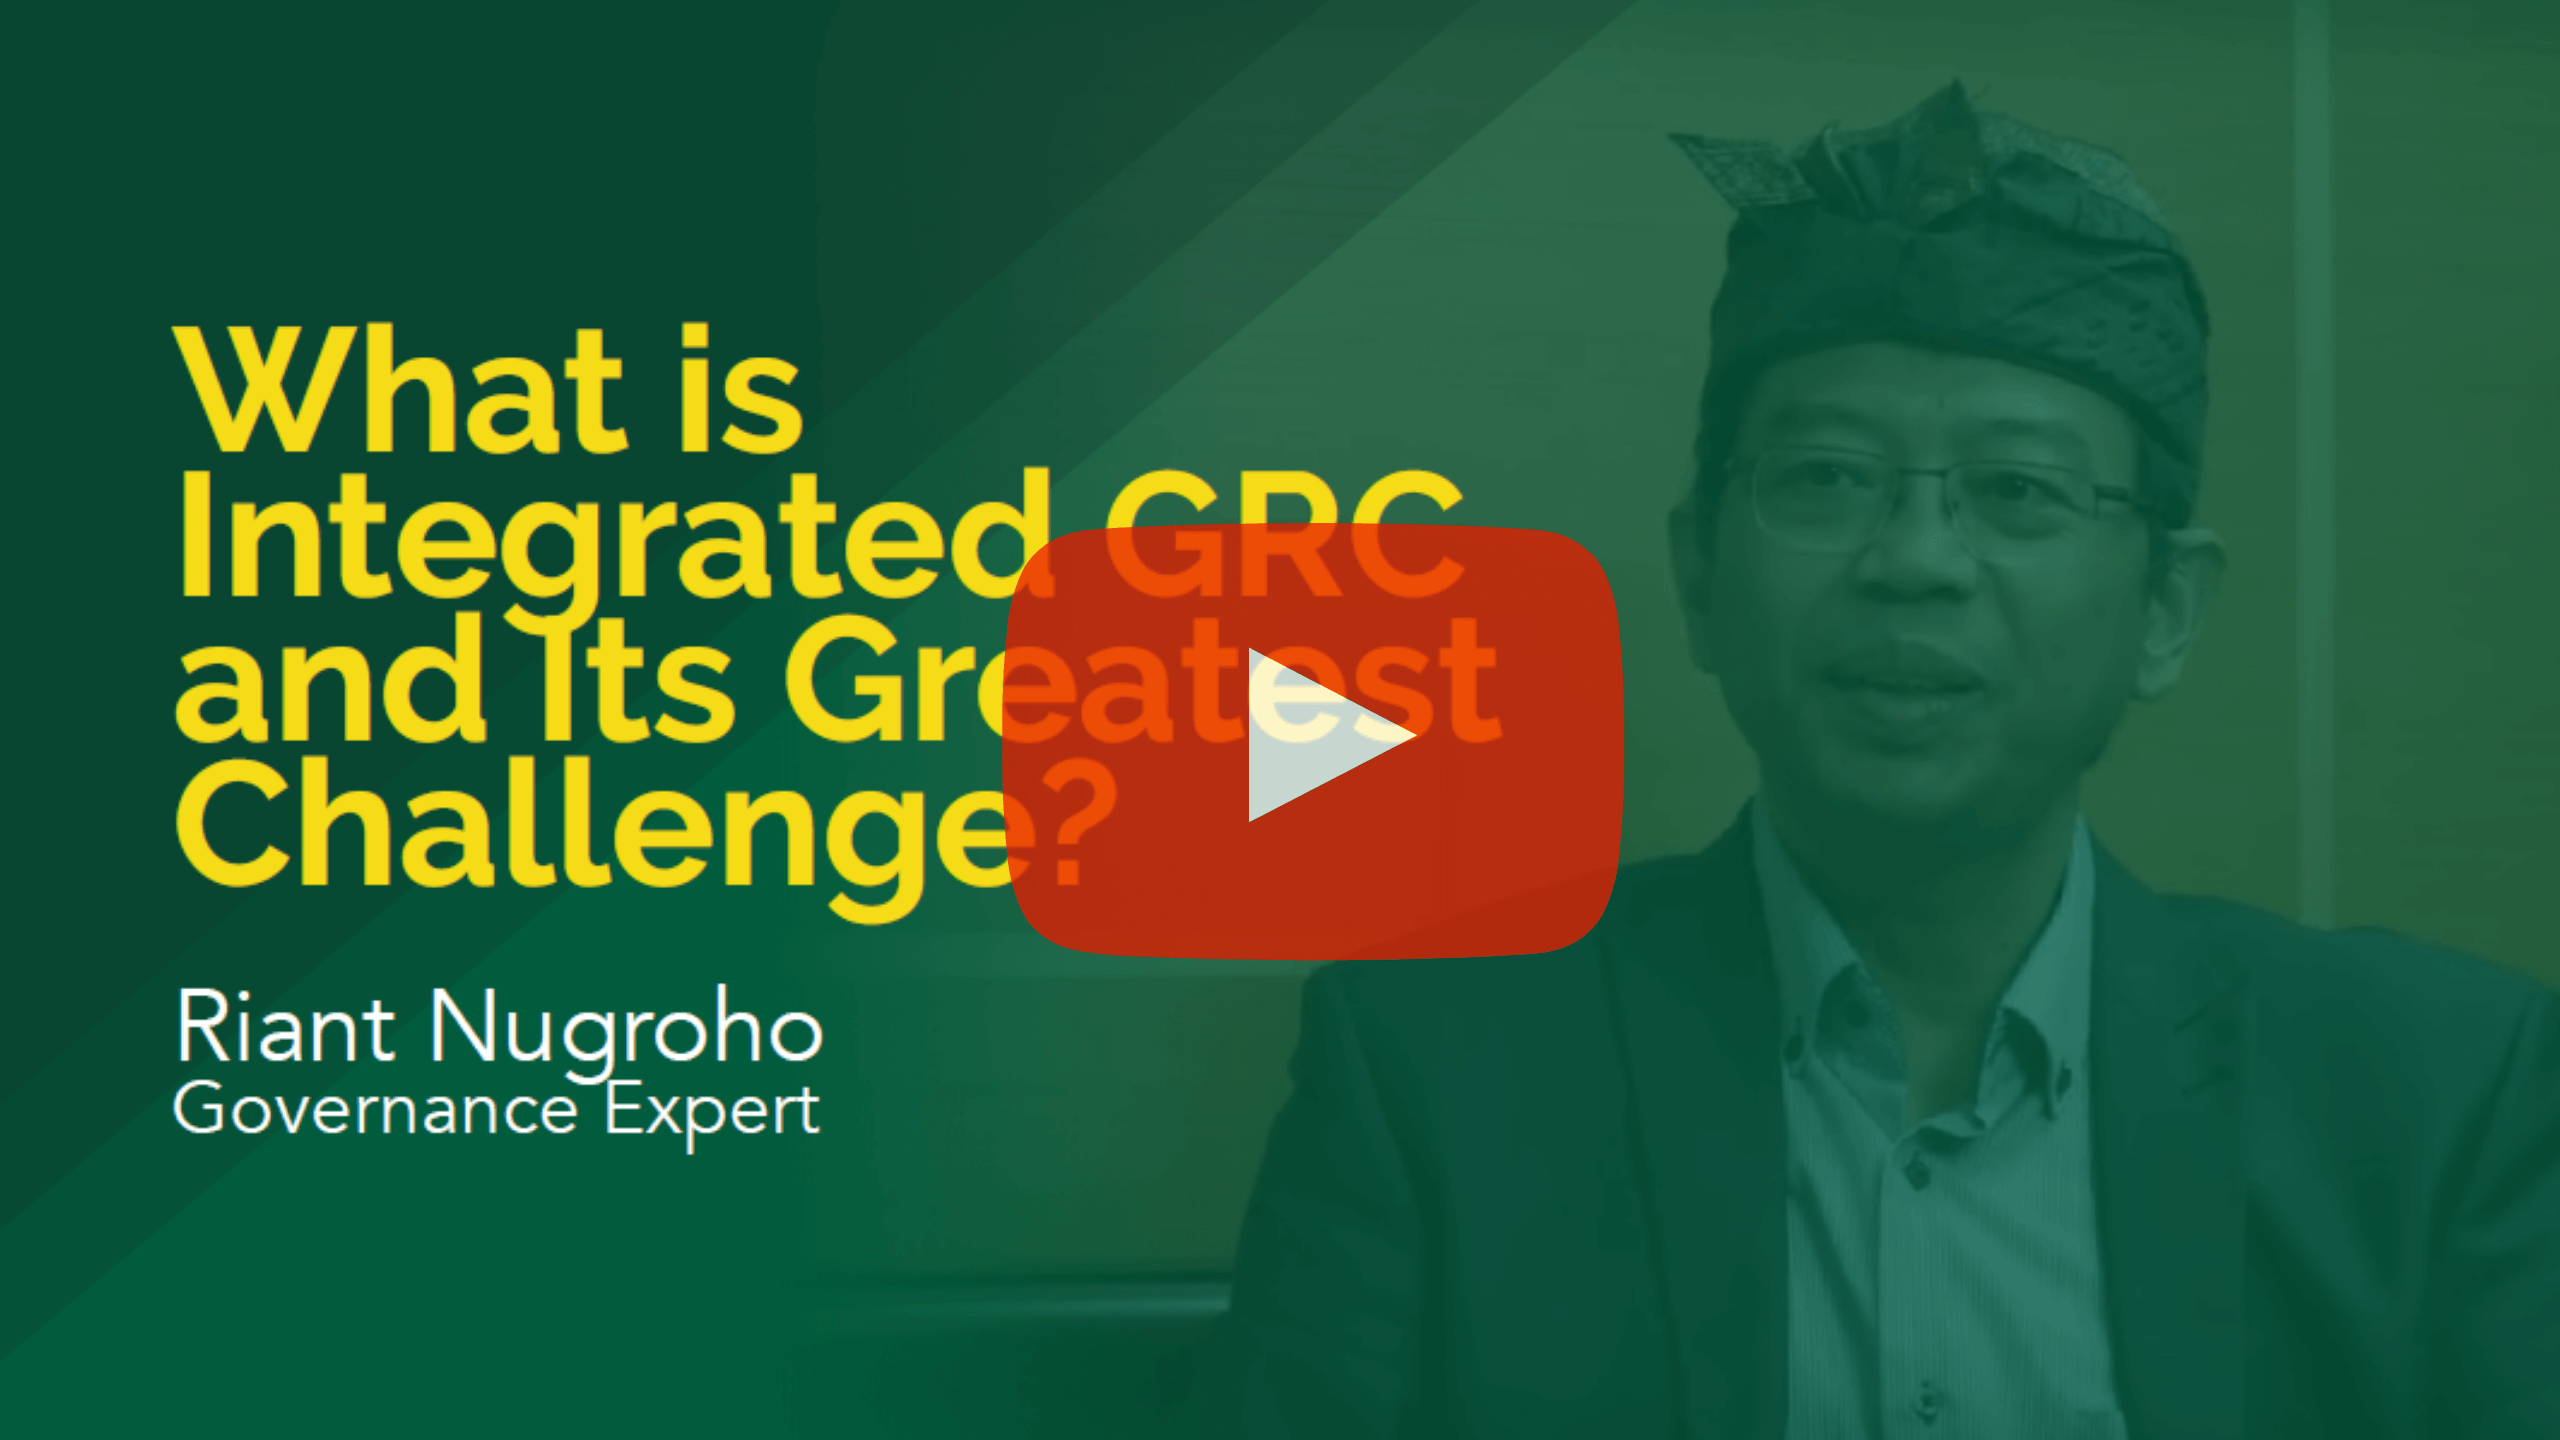 What is Integrated GRC & Its Greatest Challenge?